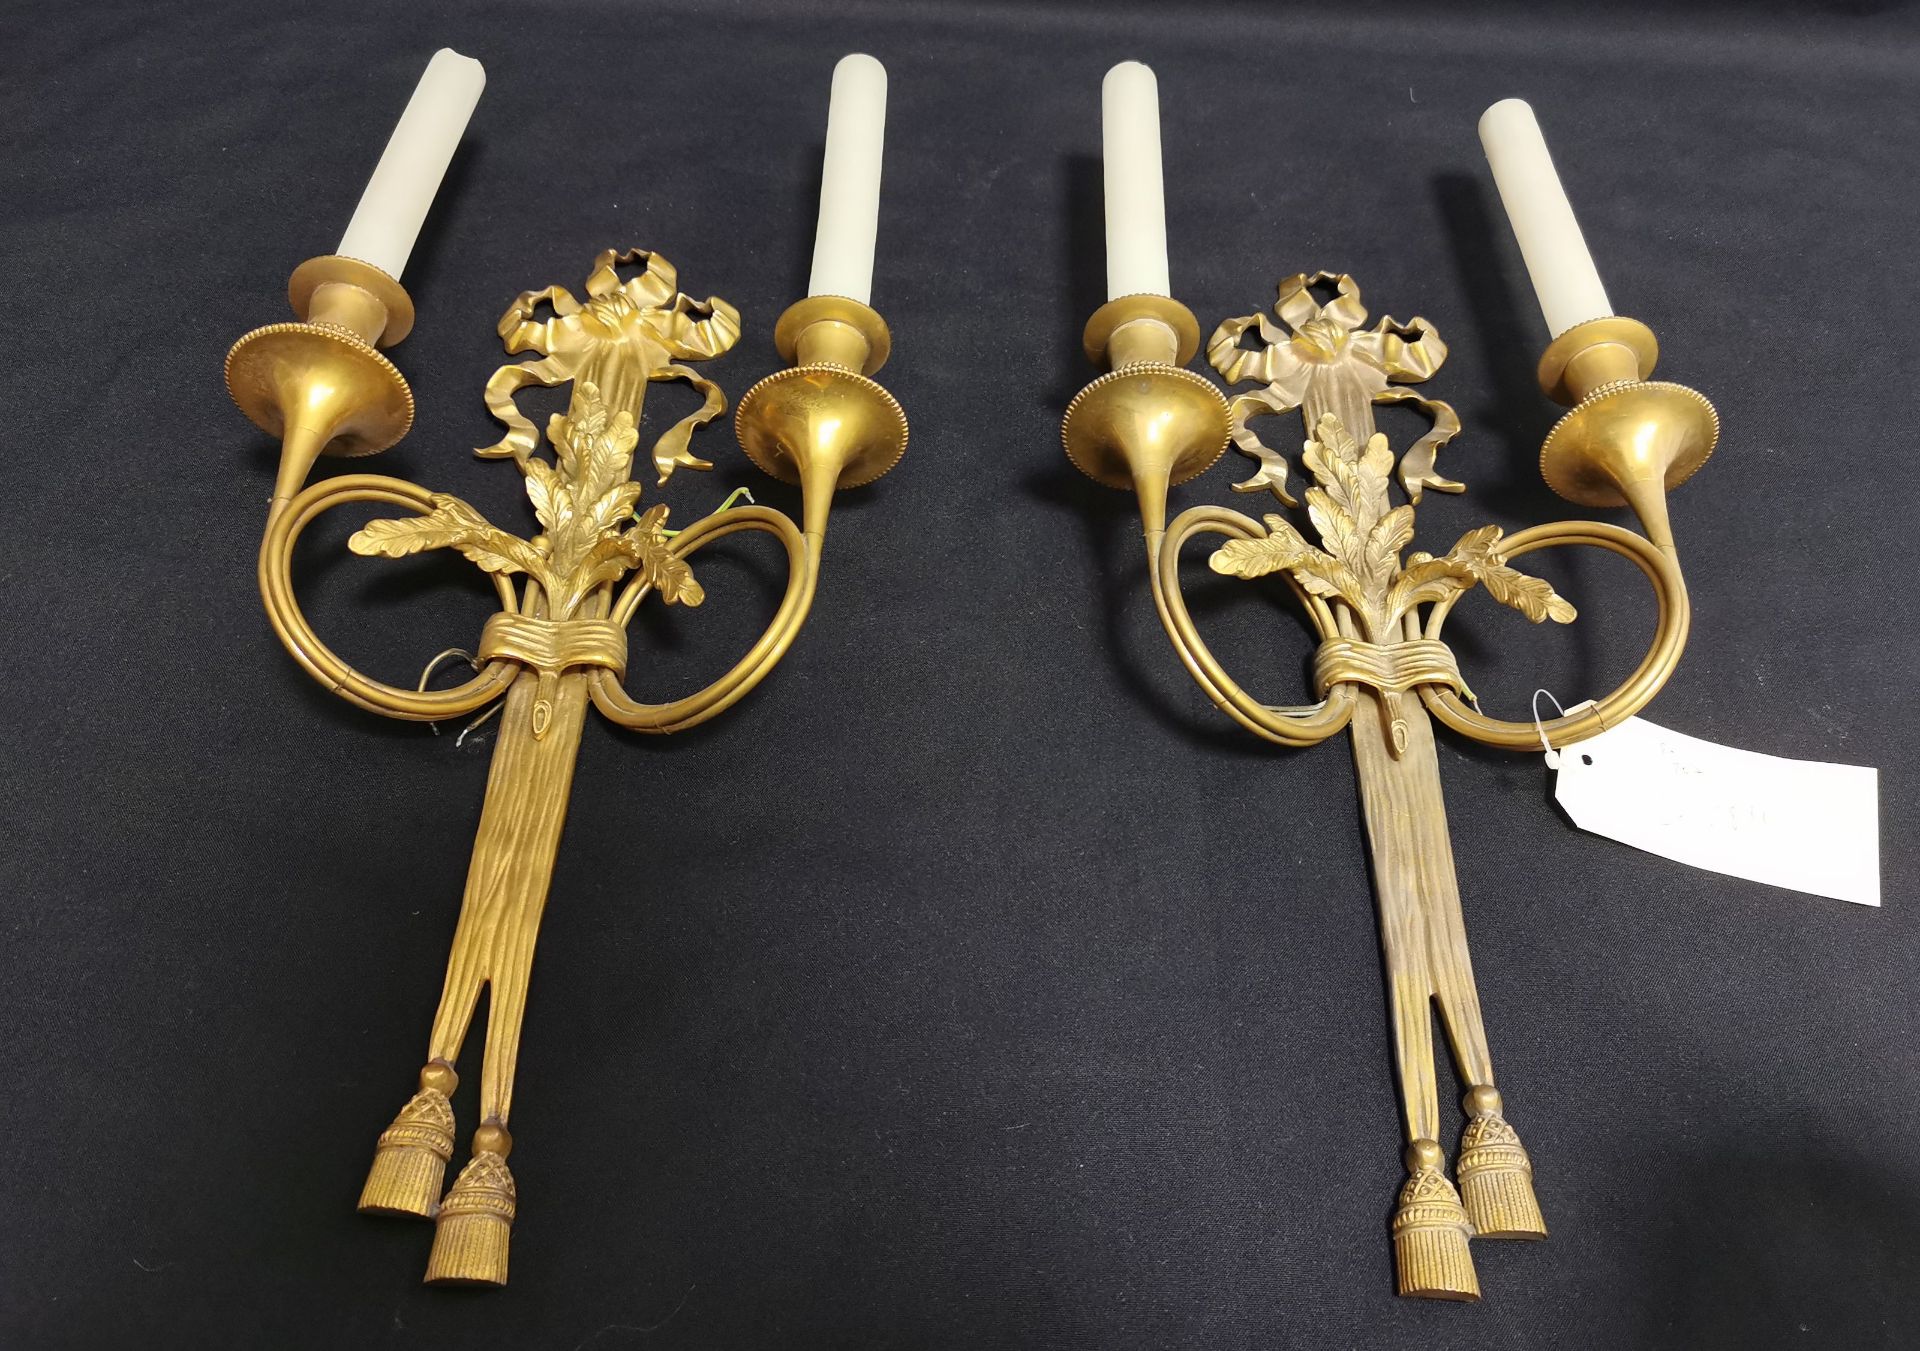 PAIR OF TWO-FLAME SCONCES IN THE FORMAL LANGUAGE OF THE EMPIRE - Image 2 of 3